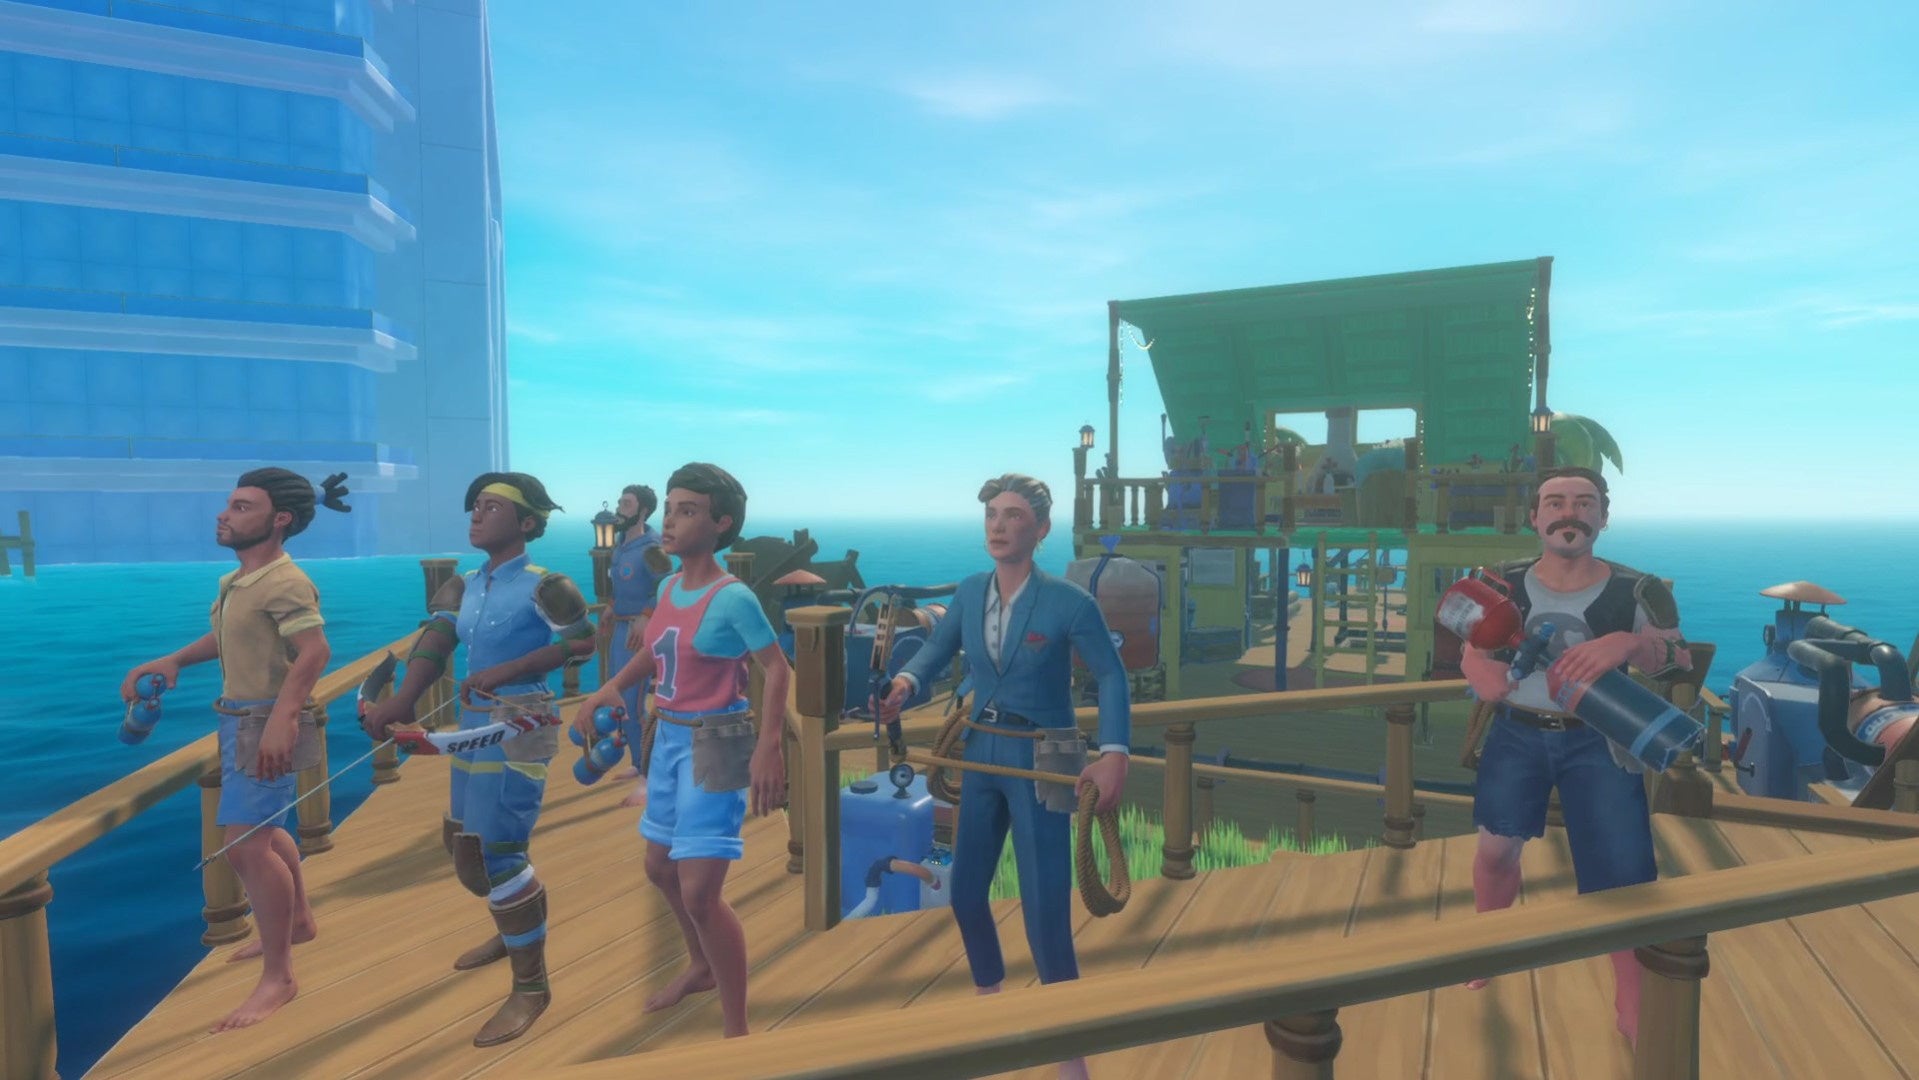 A group of characters standing on a raft watch a shocking development unfold